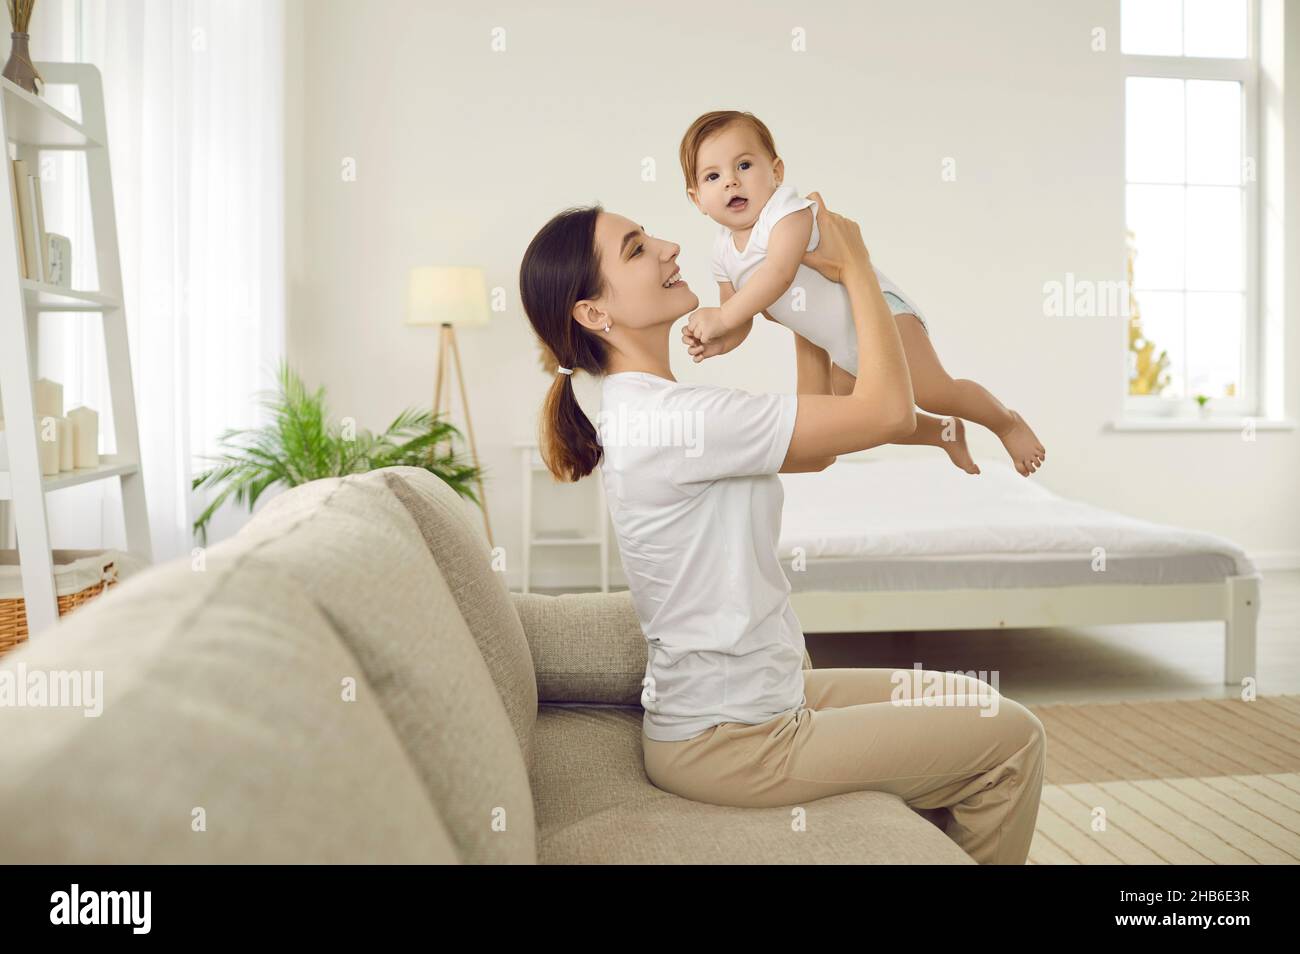 Portrait of happy cheerful young woman holding her baby and playing with her at home. Stock Photo